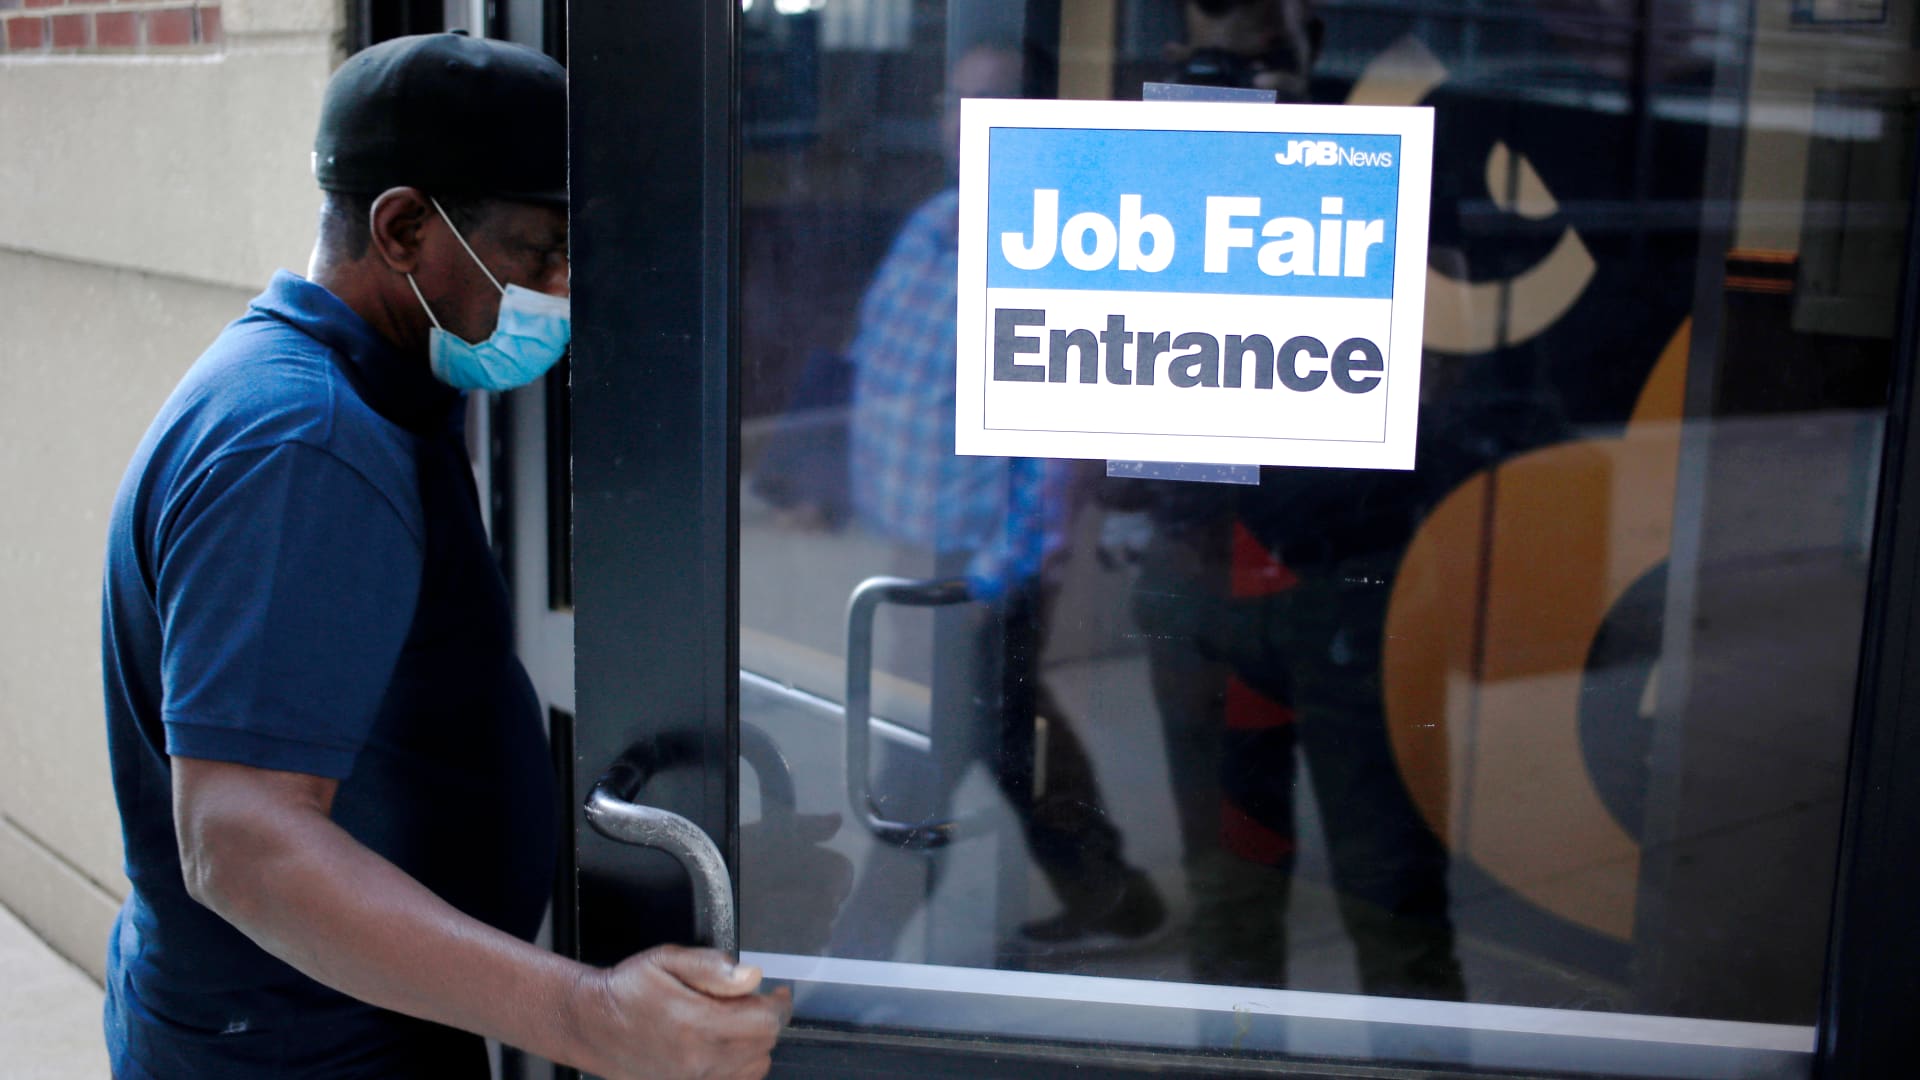 Job openings nudged down in November, down to lowest in more than two years